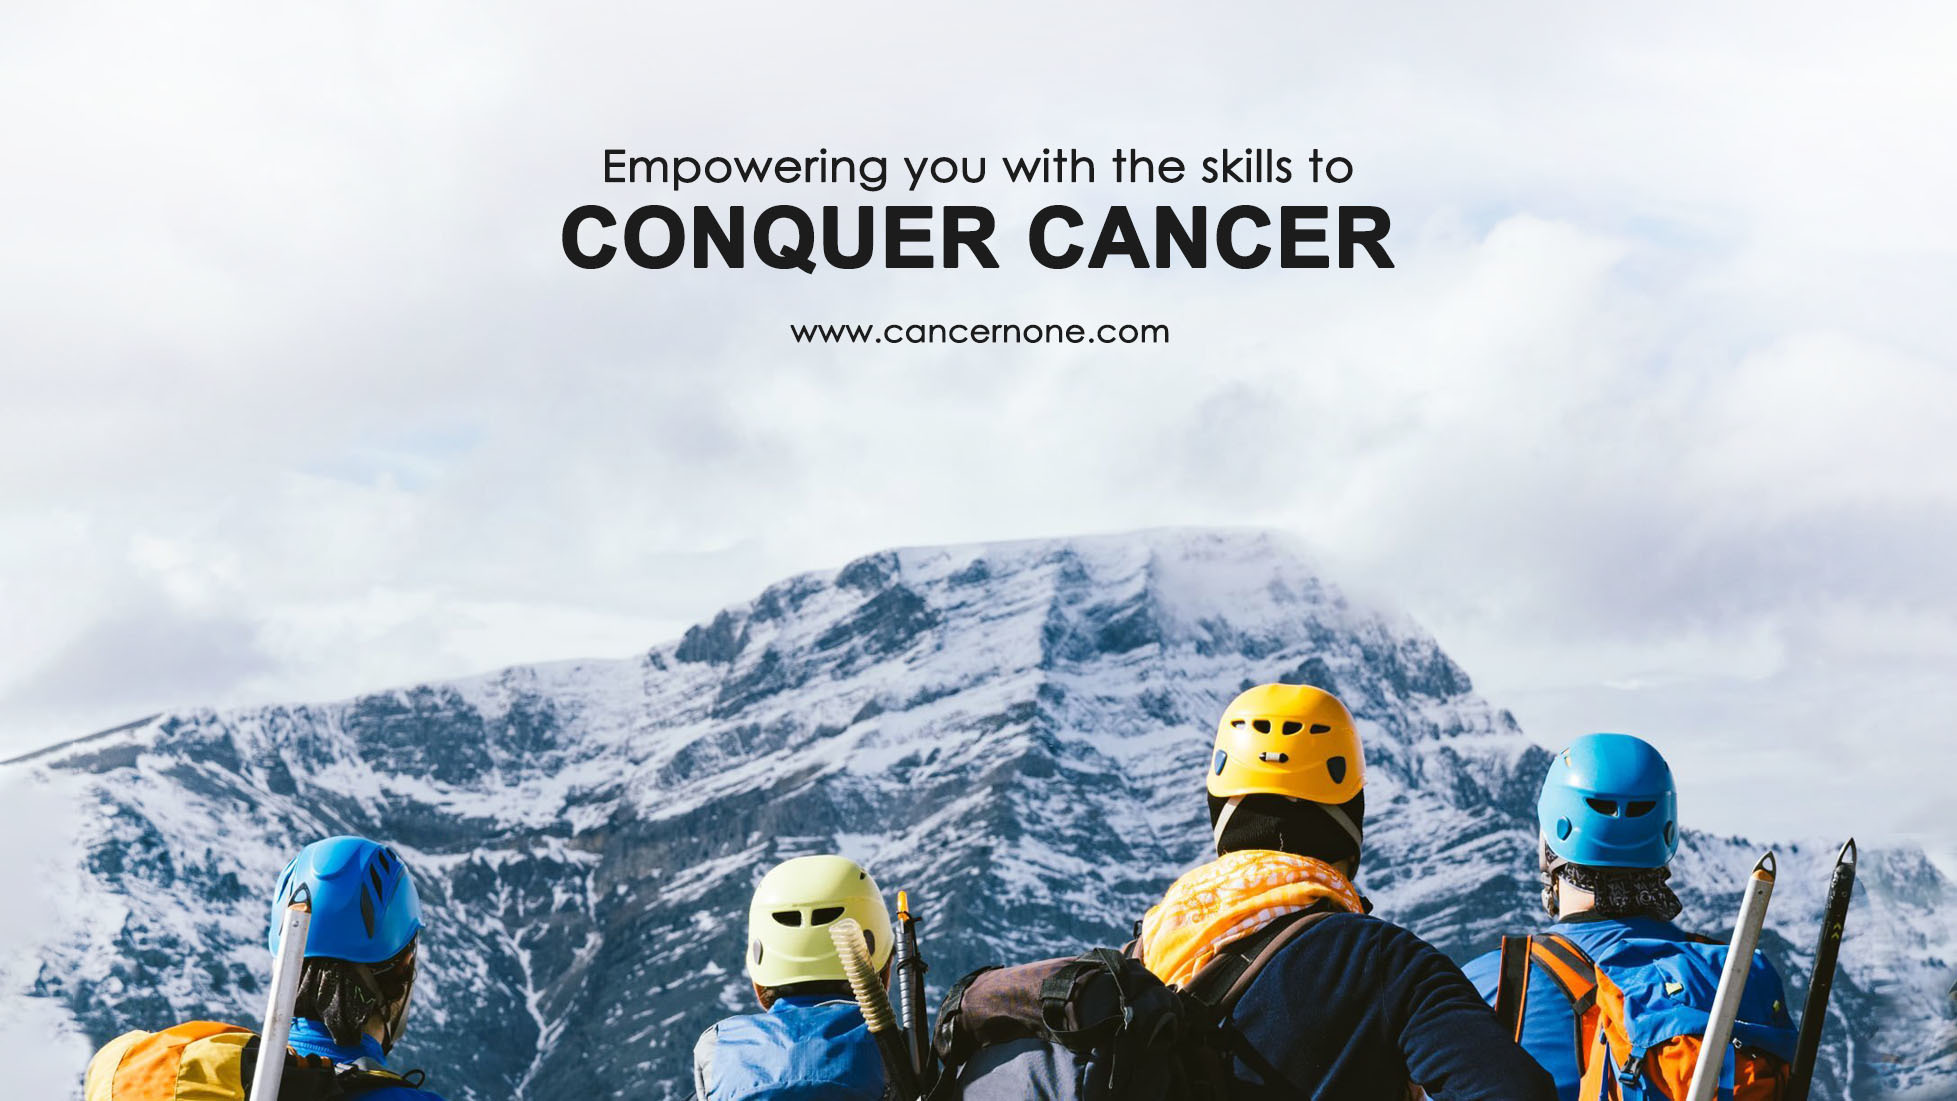 Cancernone Medical presents a Wide Array of Cancer Related Medical Guidebooks About Diagnosis, Treatment and Recovery